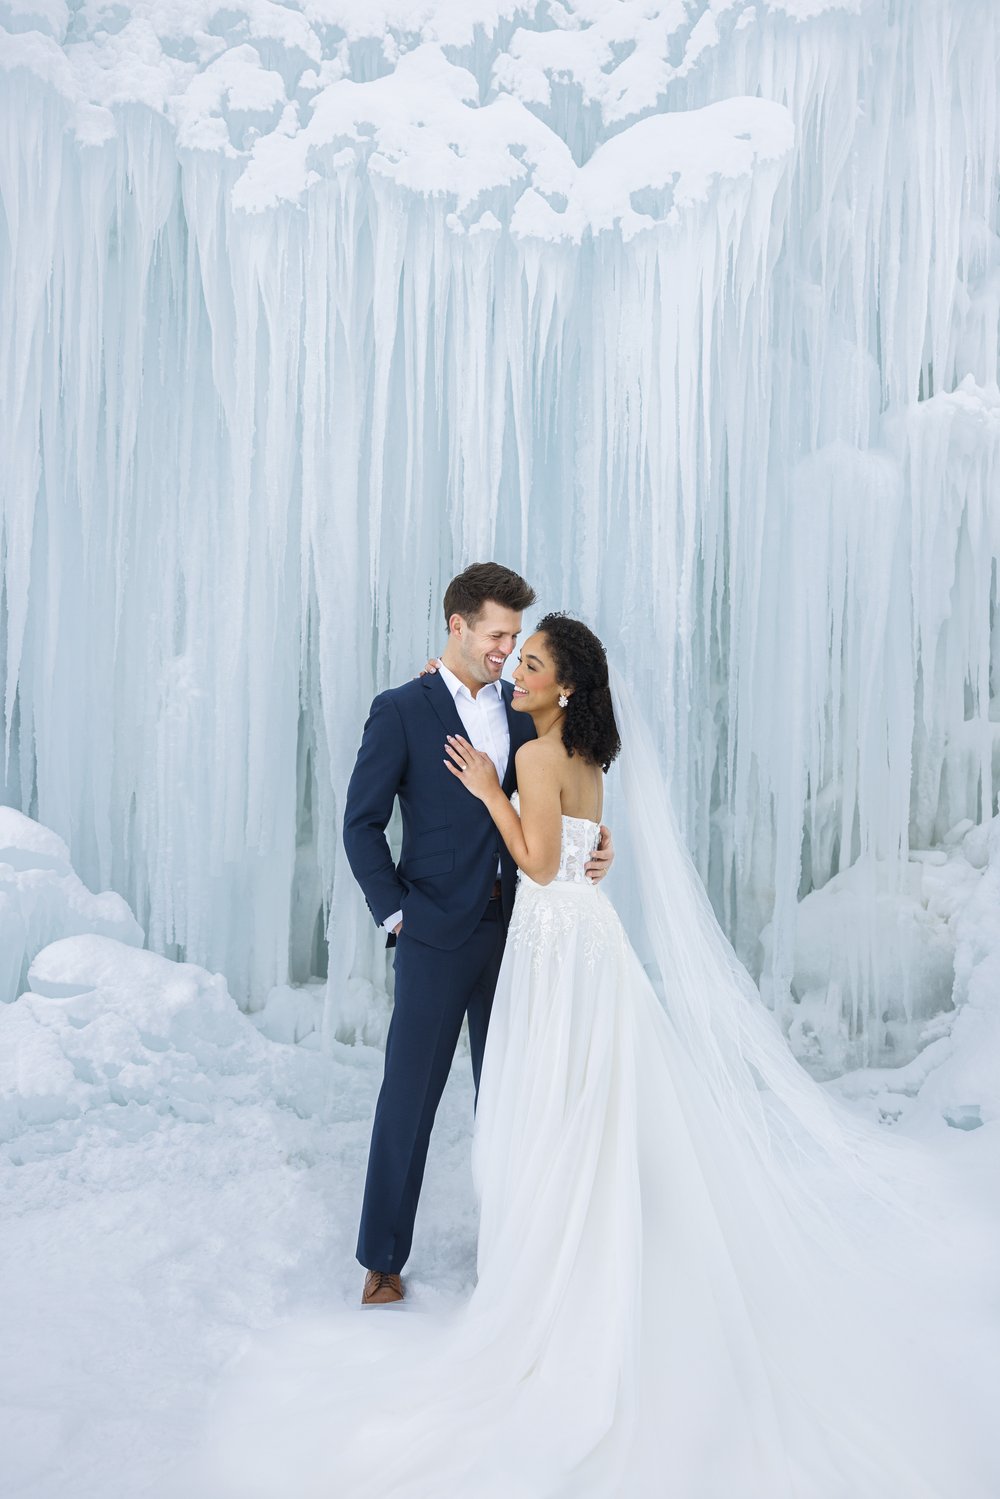 2301-03 Ice Castles Styled Bridals_05248.jpg